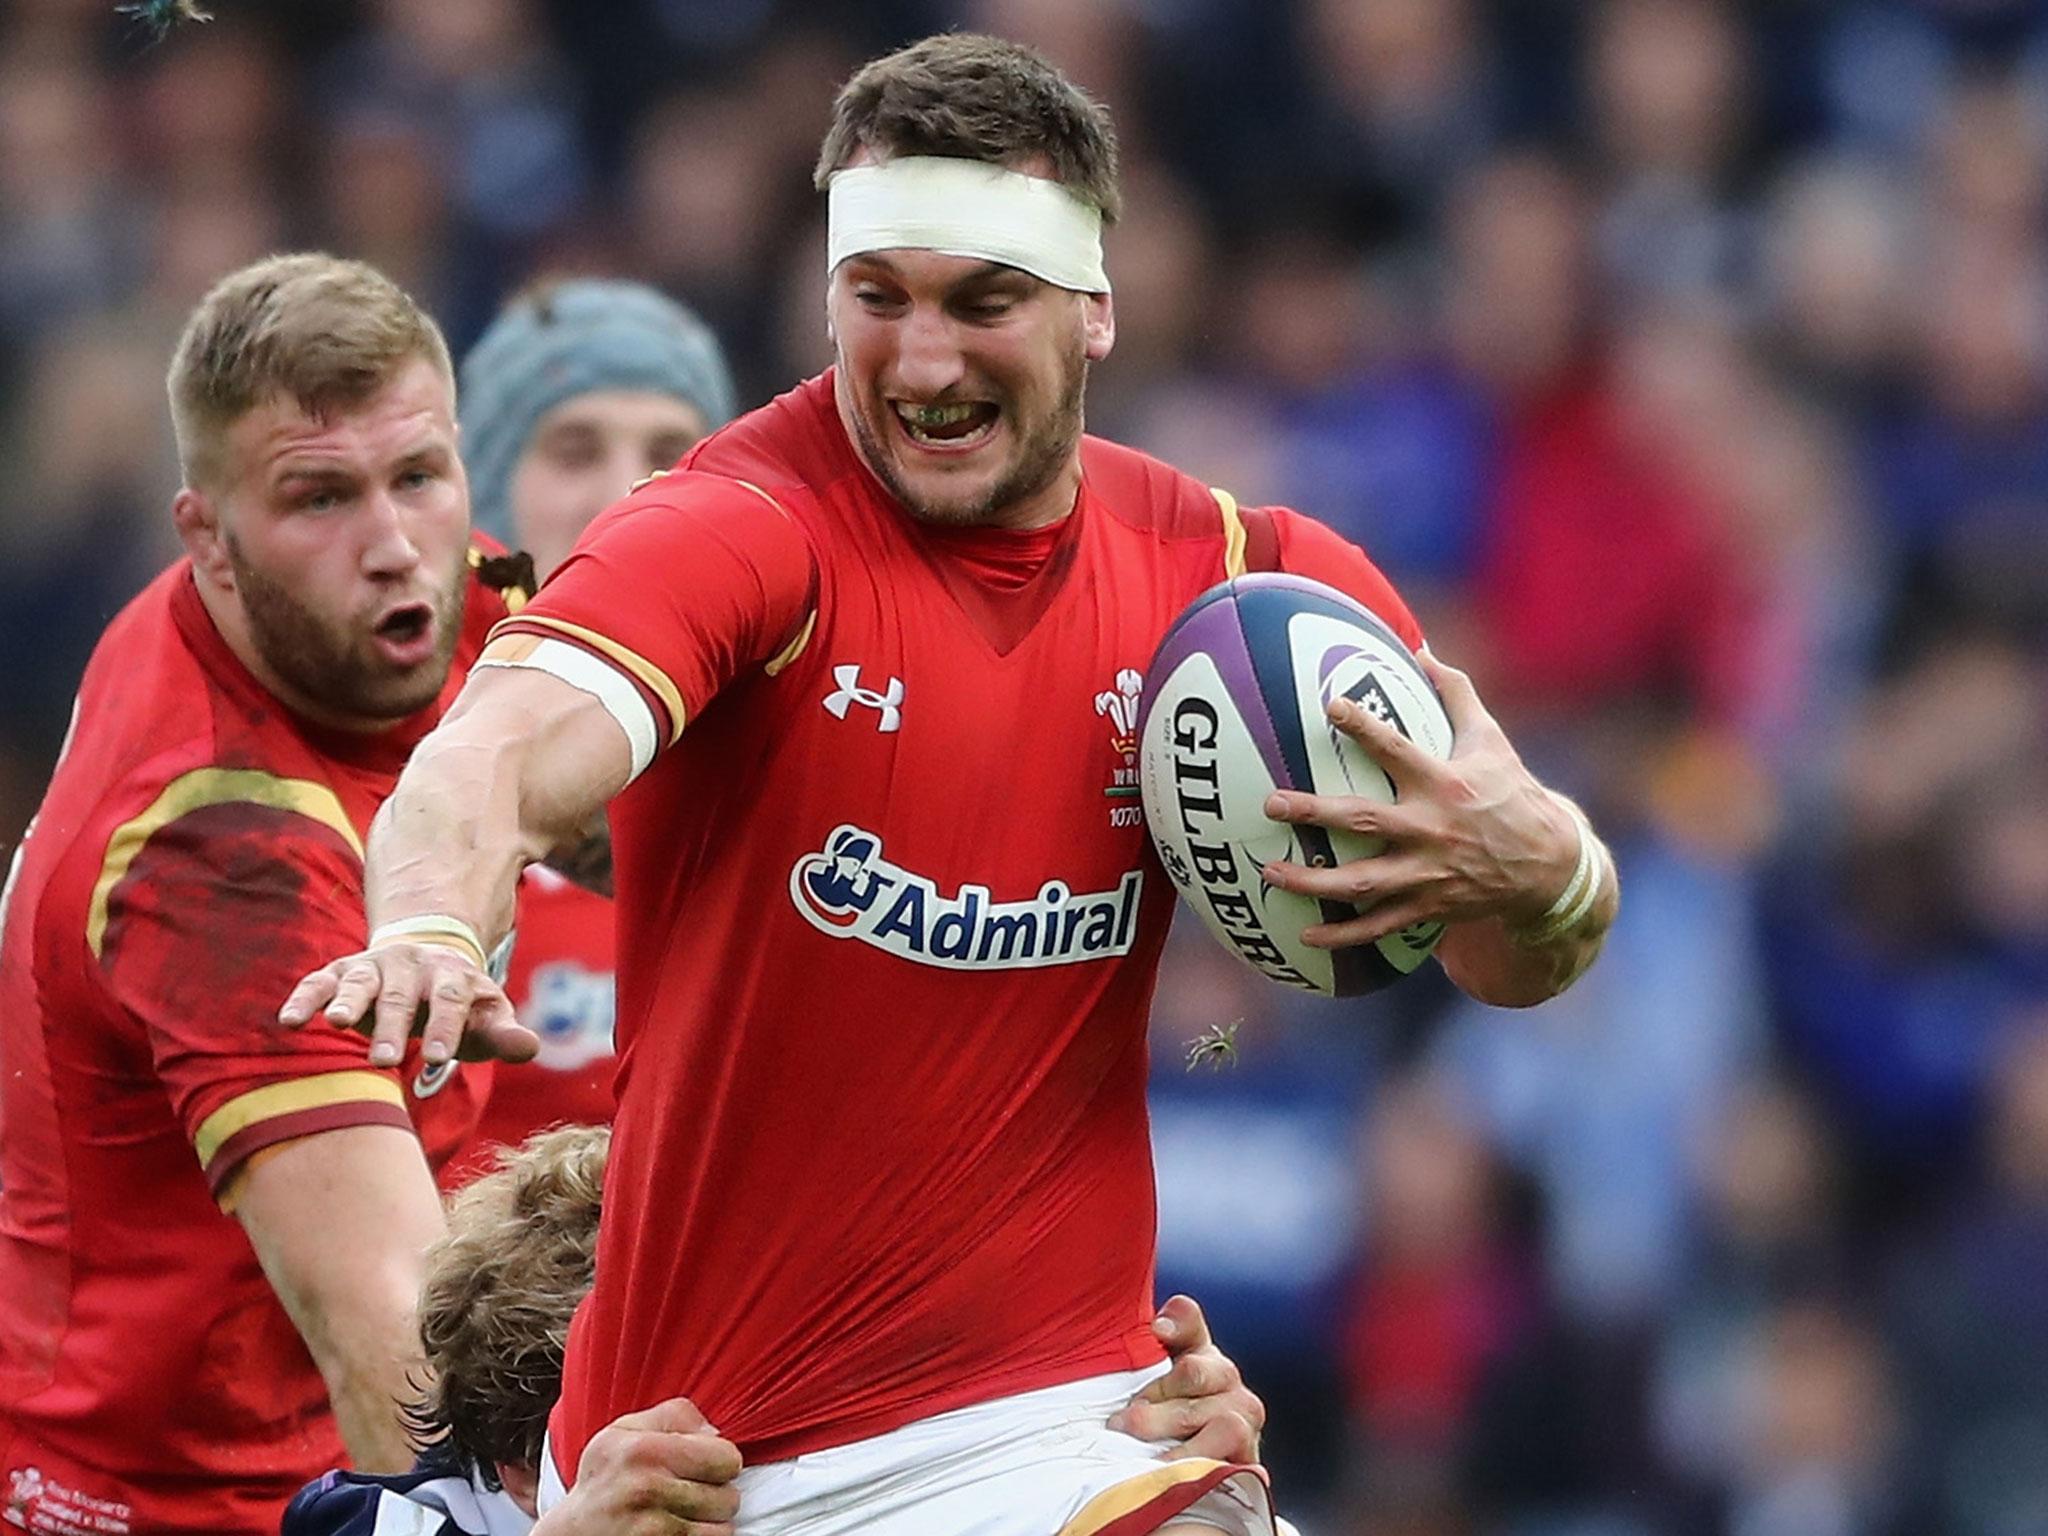 Sam Warburton has been left off the Six Nations Player of the Championship shortlist